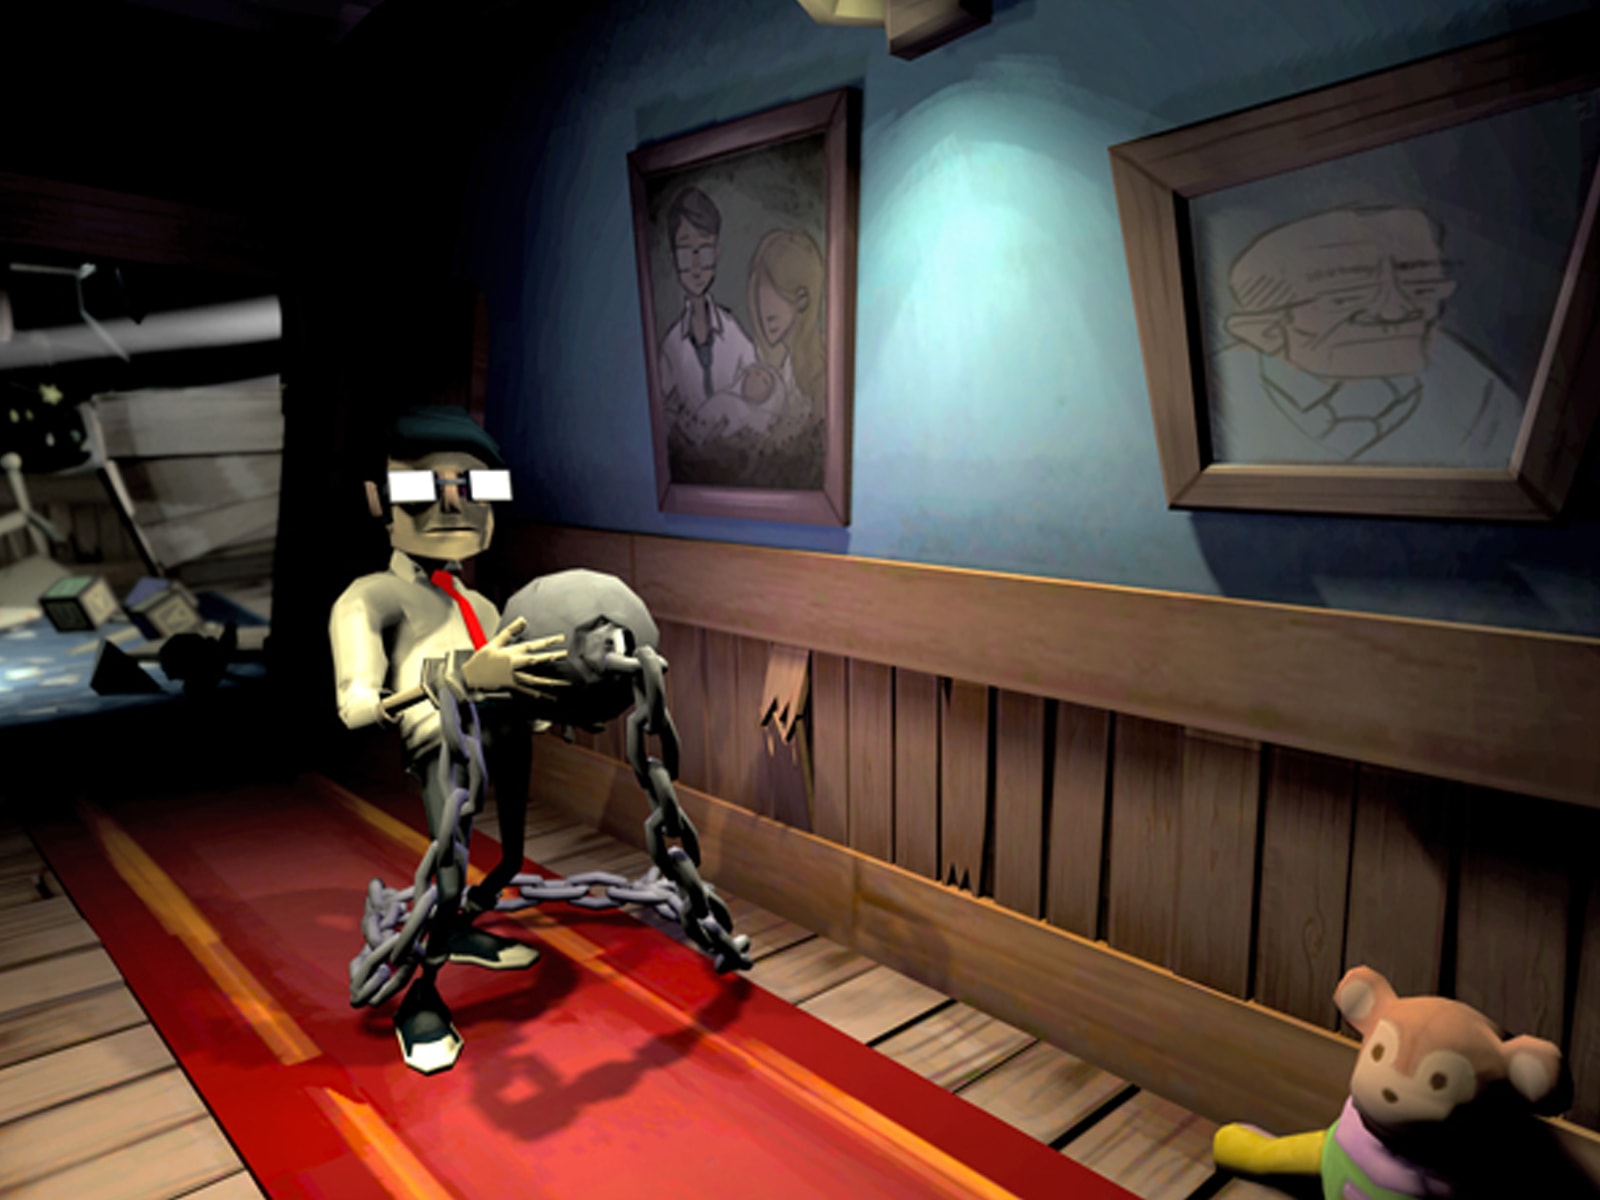 Screenshot from DigiPen student game Chained featuring a young man stumbling down a hallway carrying a ball and chain